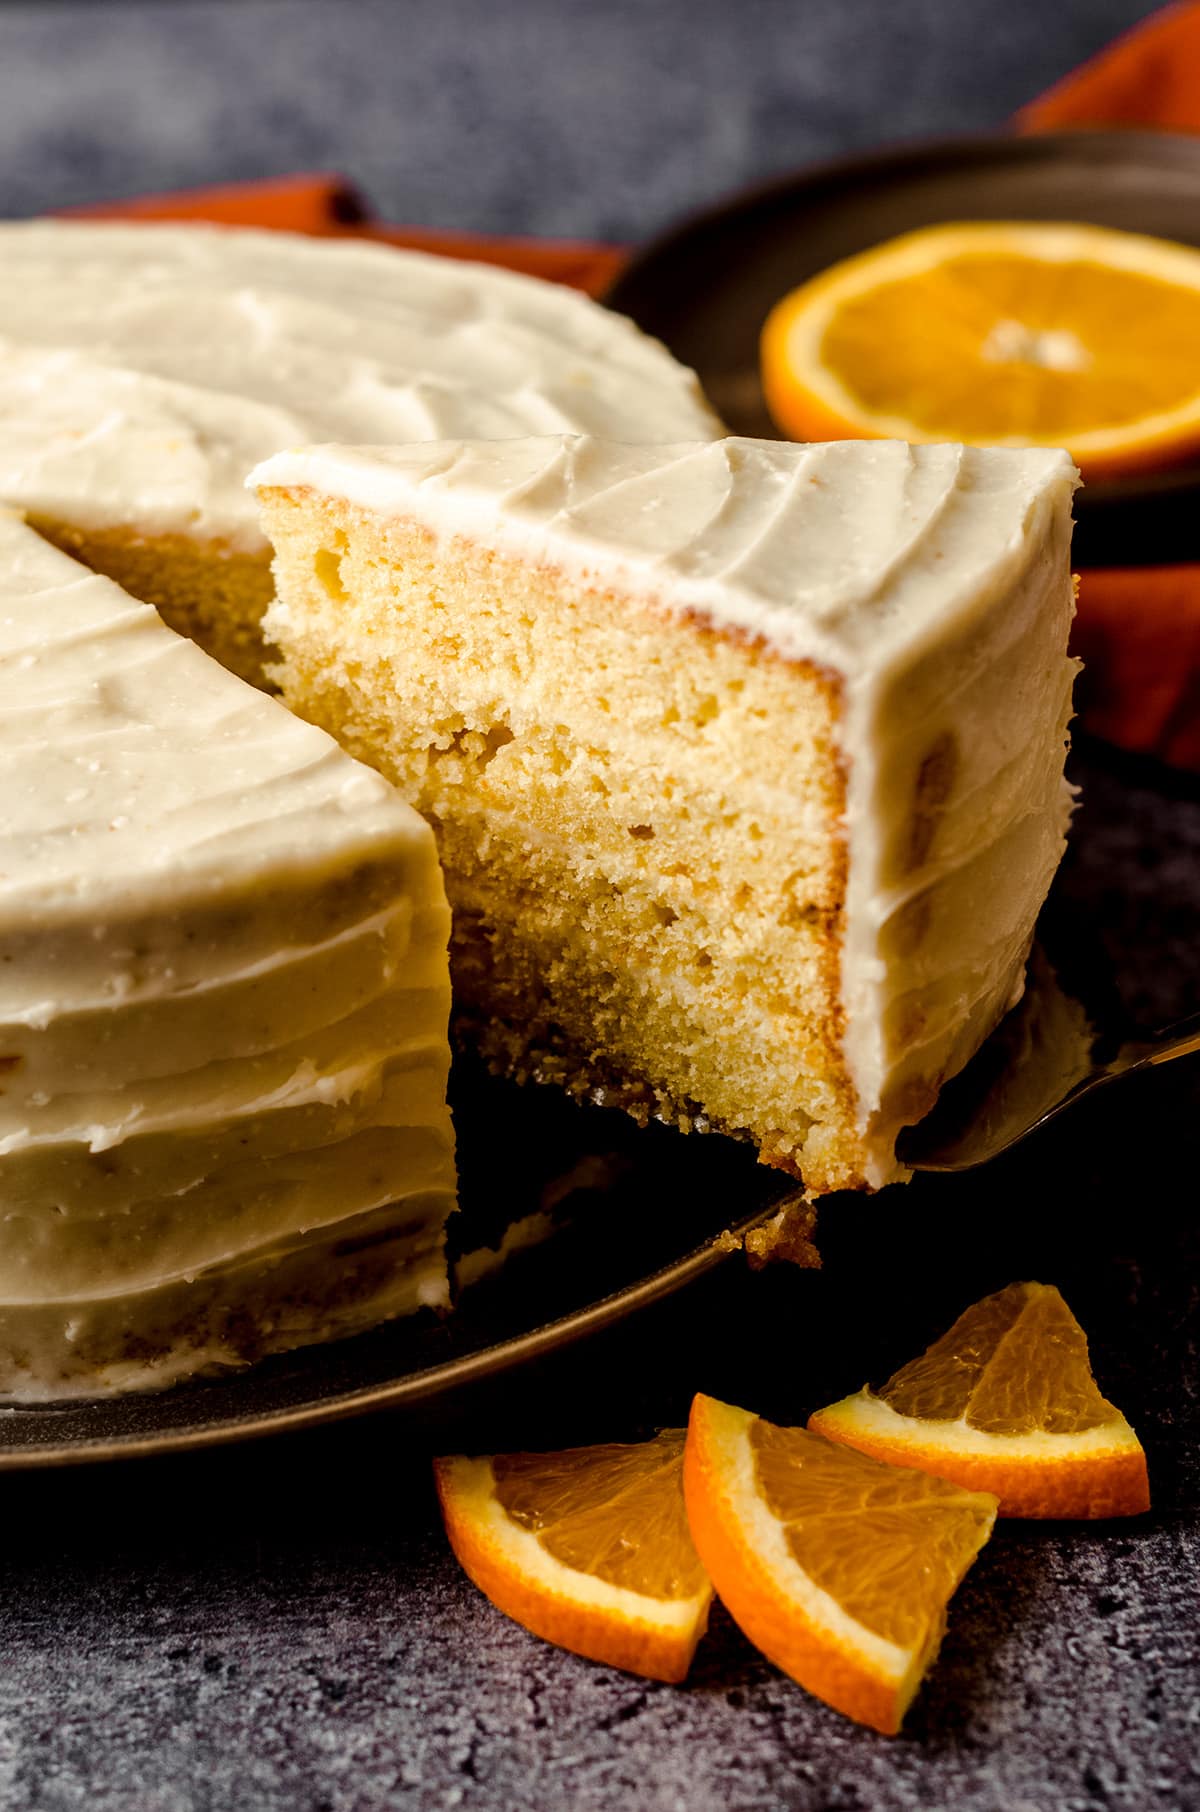 Gluten-Free Orange Creamsicle Cake (Dairy-Free) - Caked by Katie